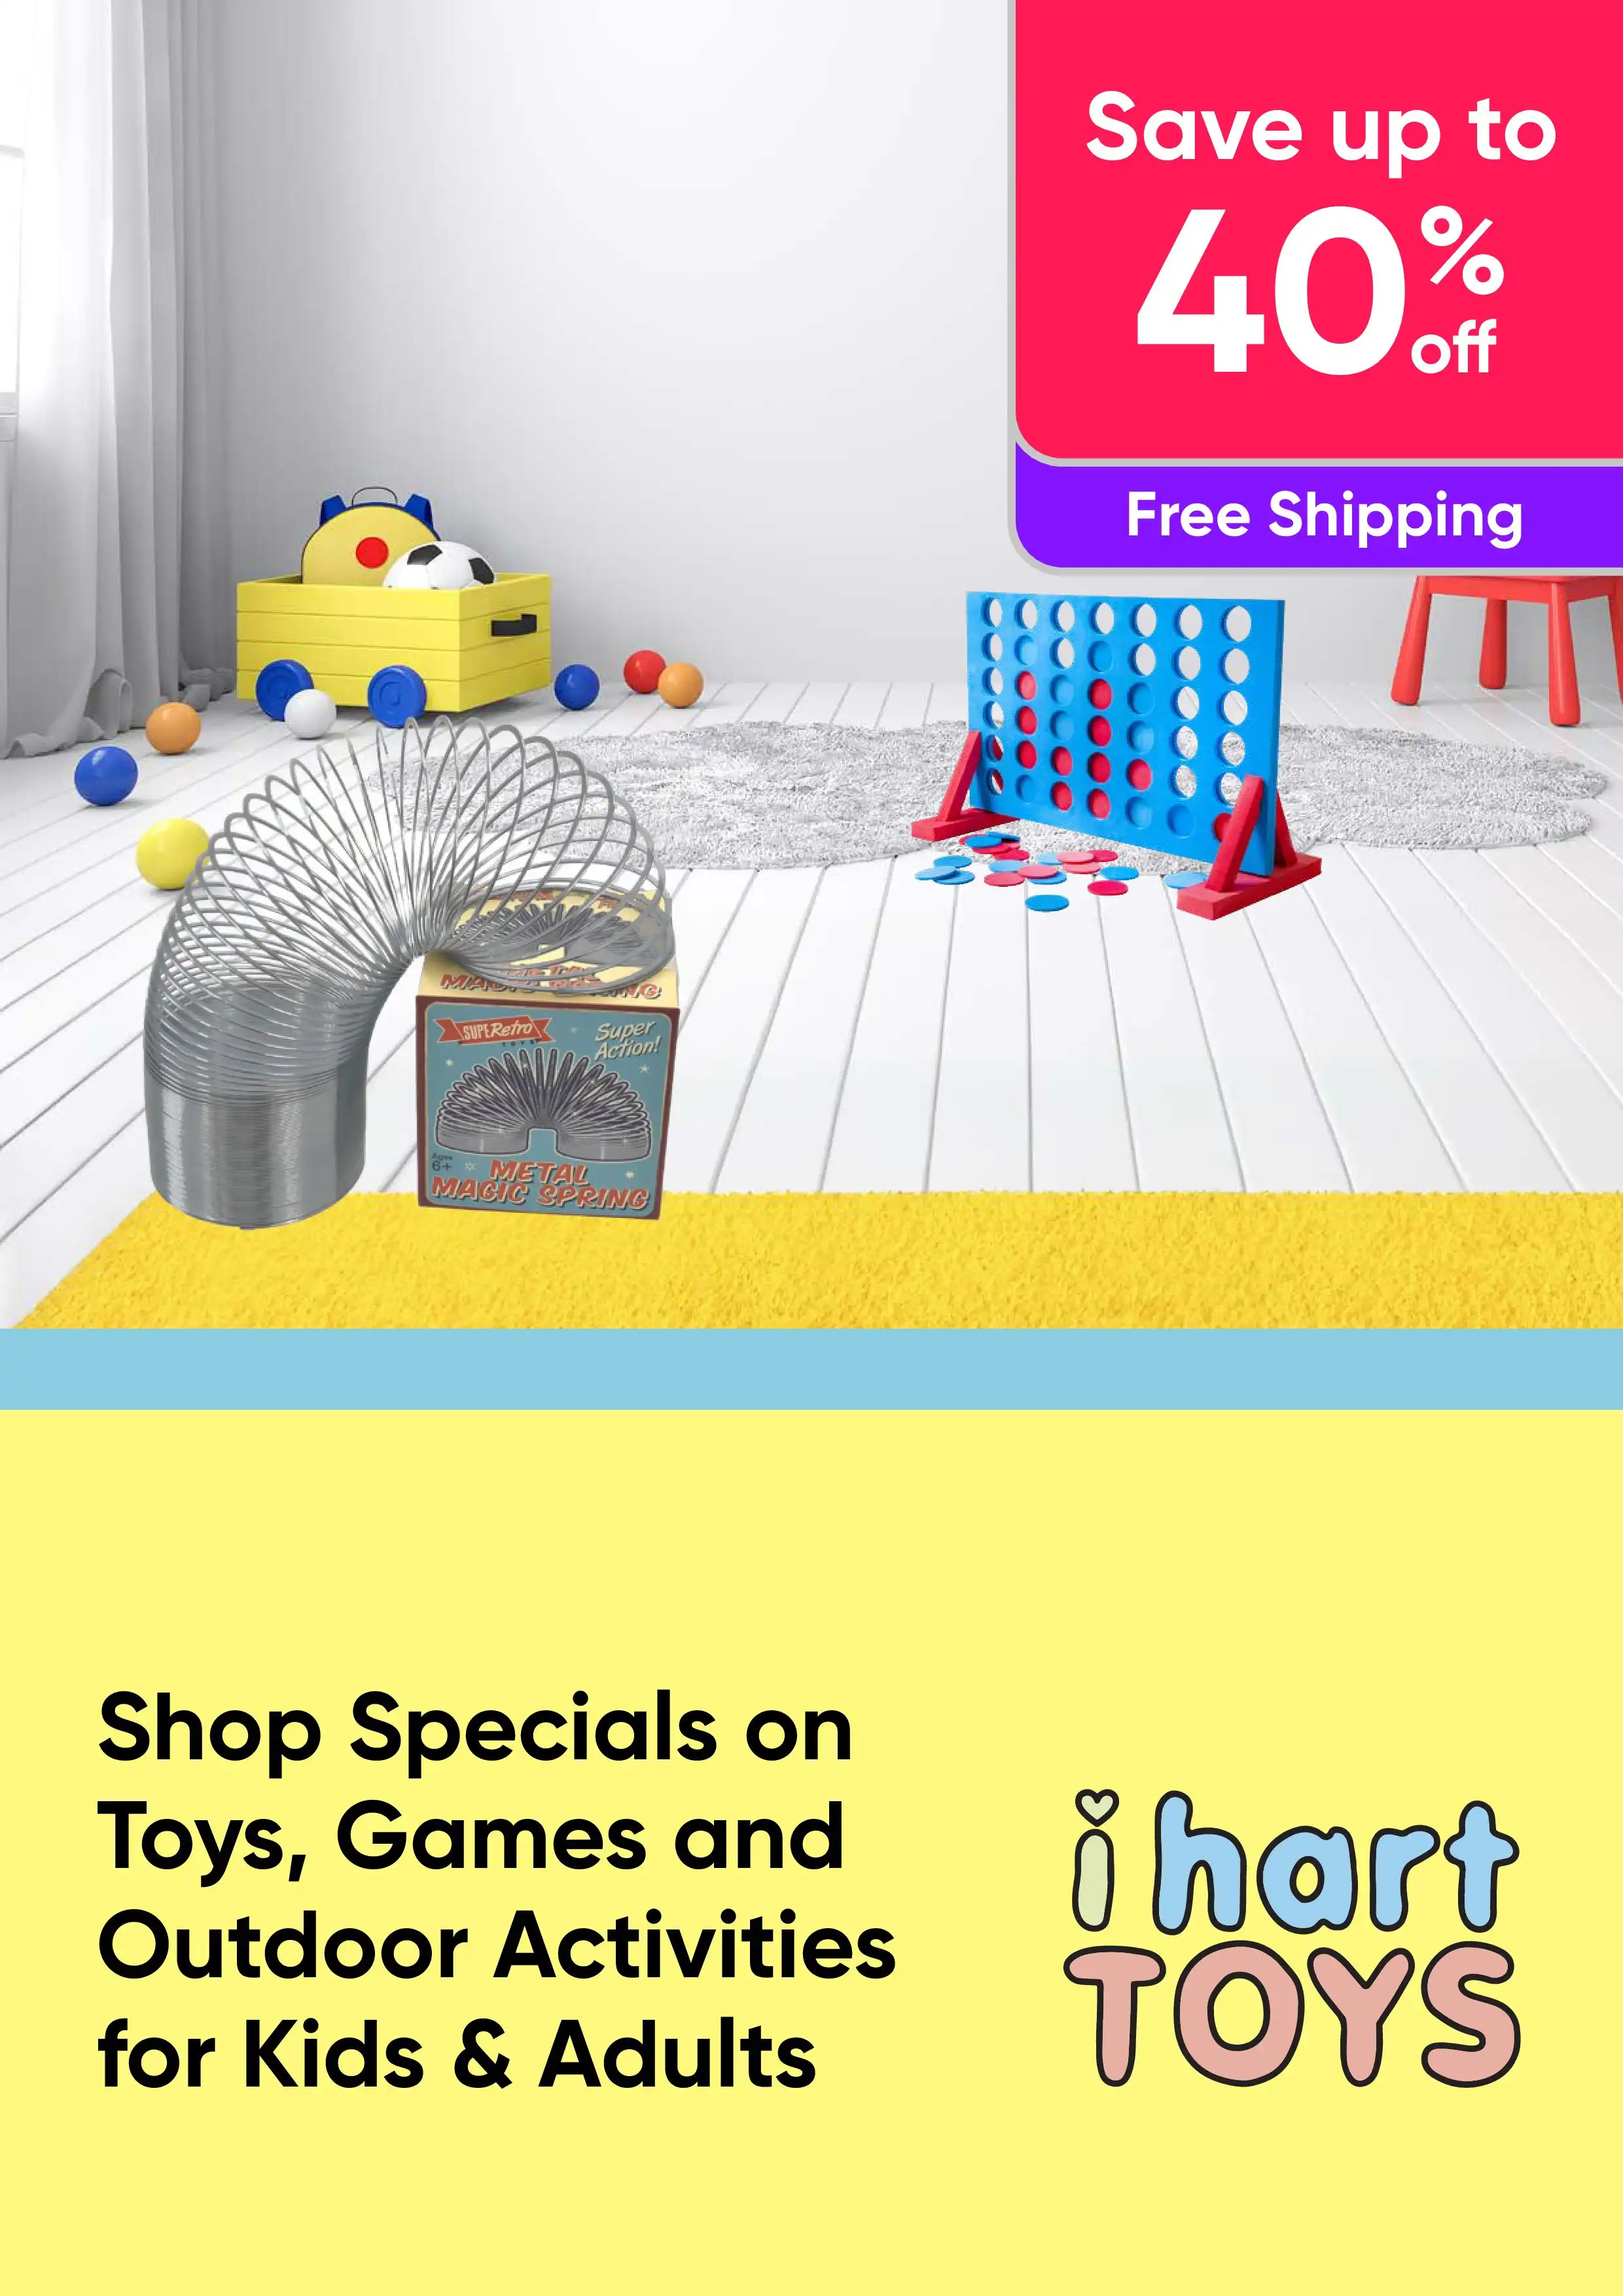 Shop Specials on Toys, Games and Outdoor Activities for Kids and Adults